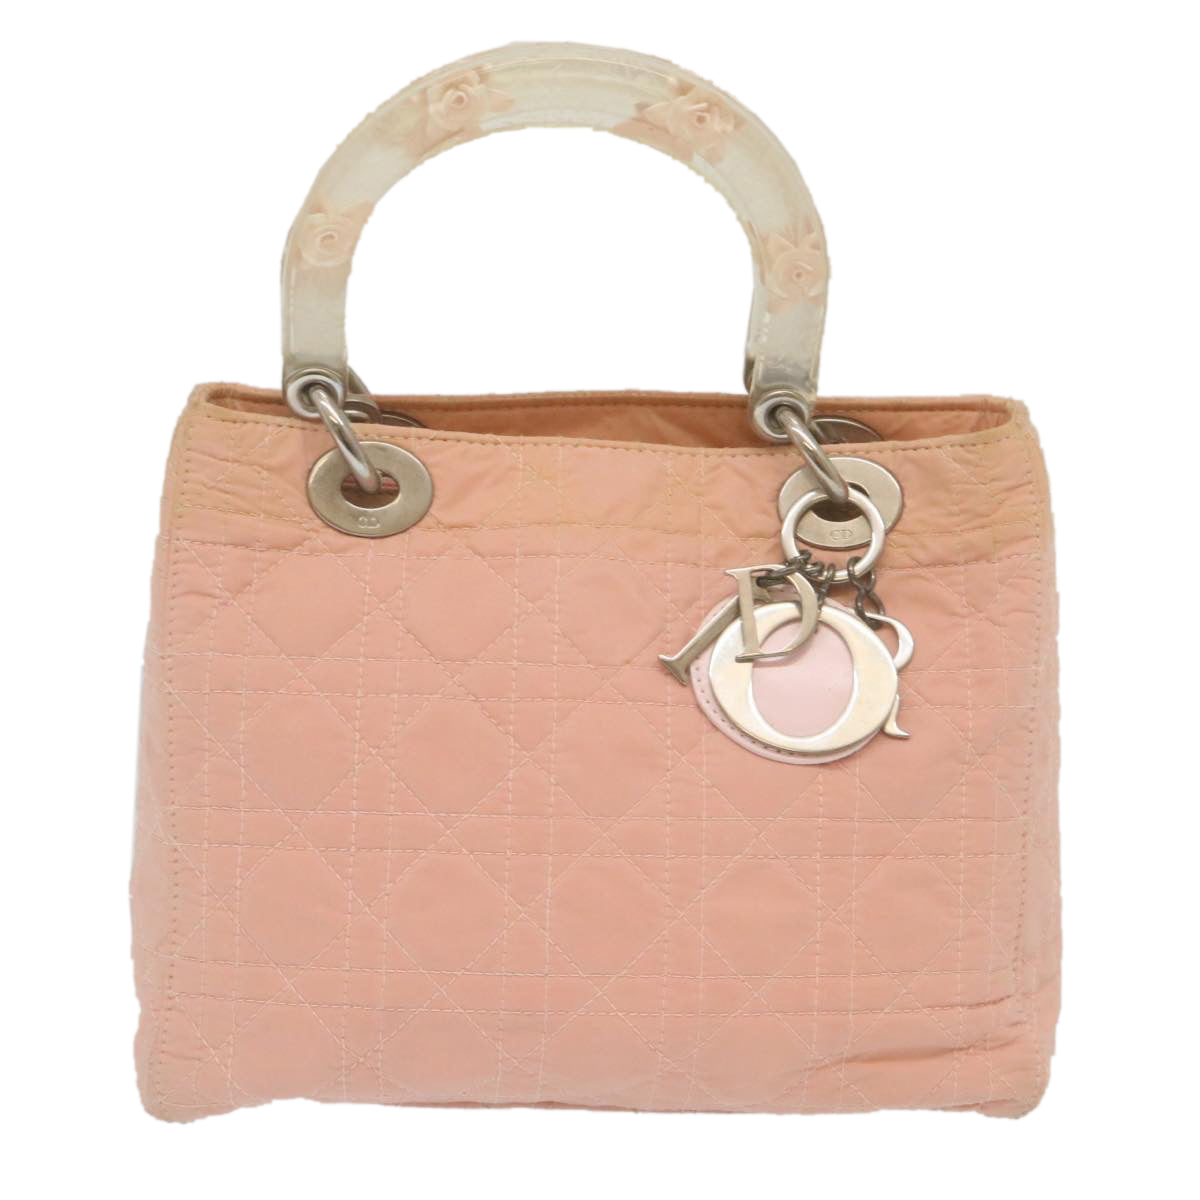 Christian Dior Canage Lady Dior 2Way Hand Shoulder Bag Nylon Pink Auth 29353